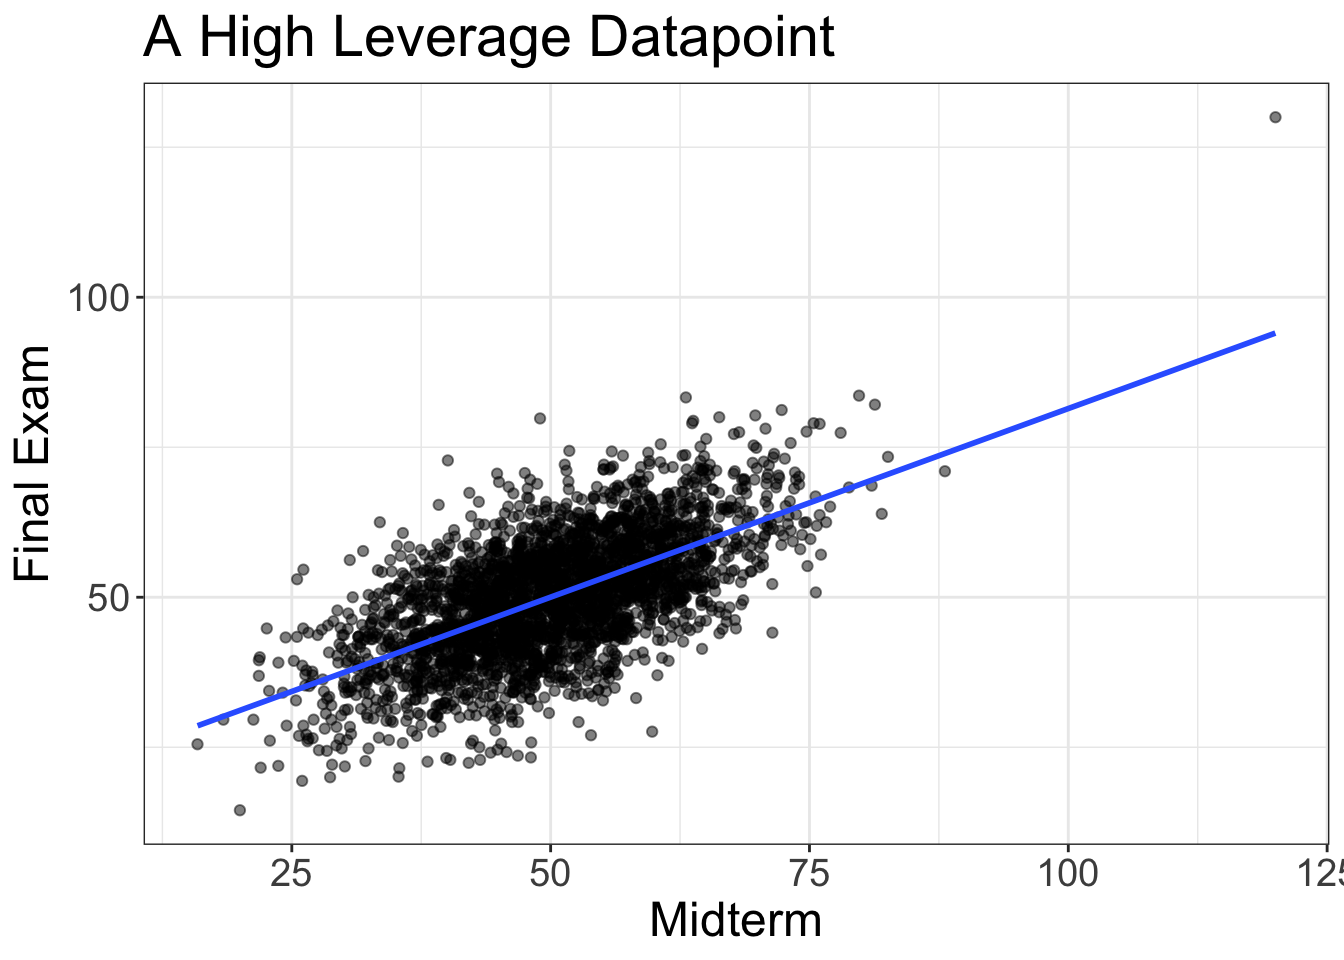 High Leverage Datapoints Follow the Pattern, 
but Make It Look Stronger Than It Really Is.